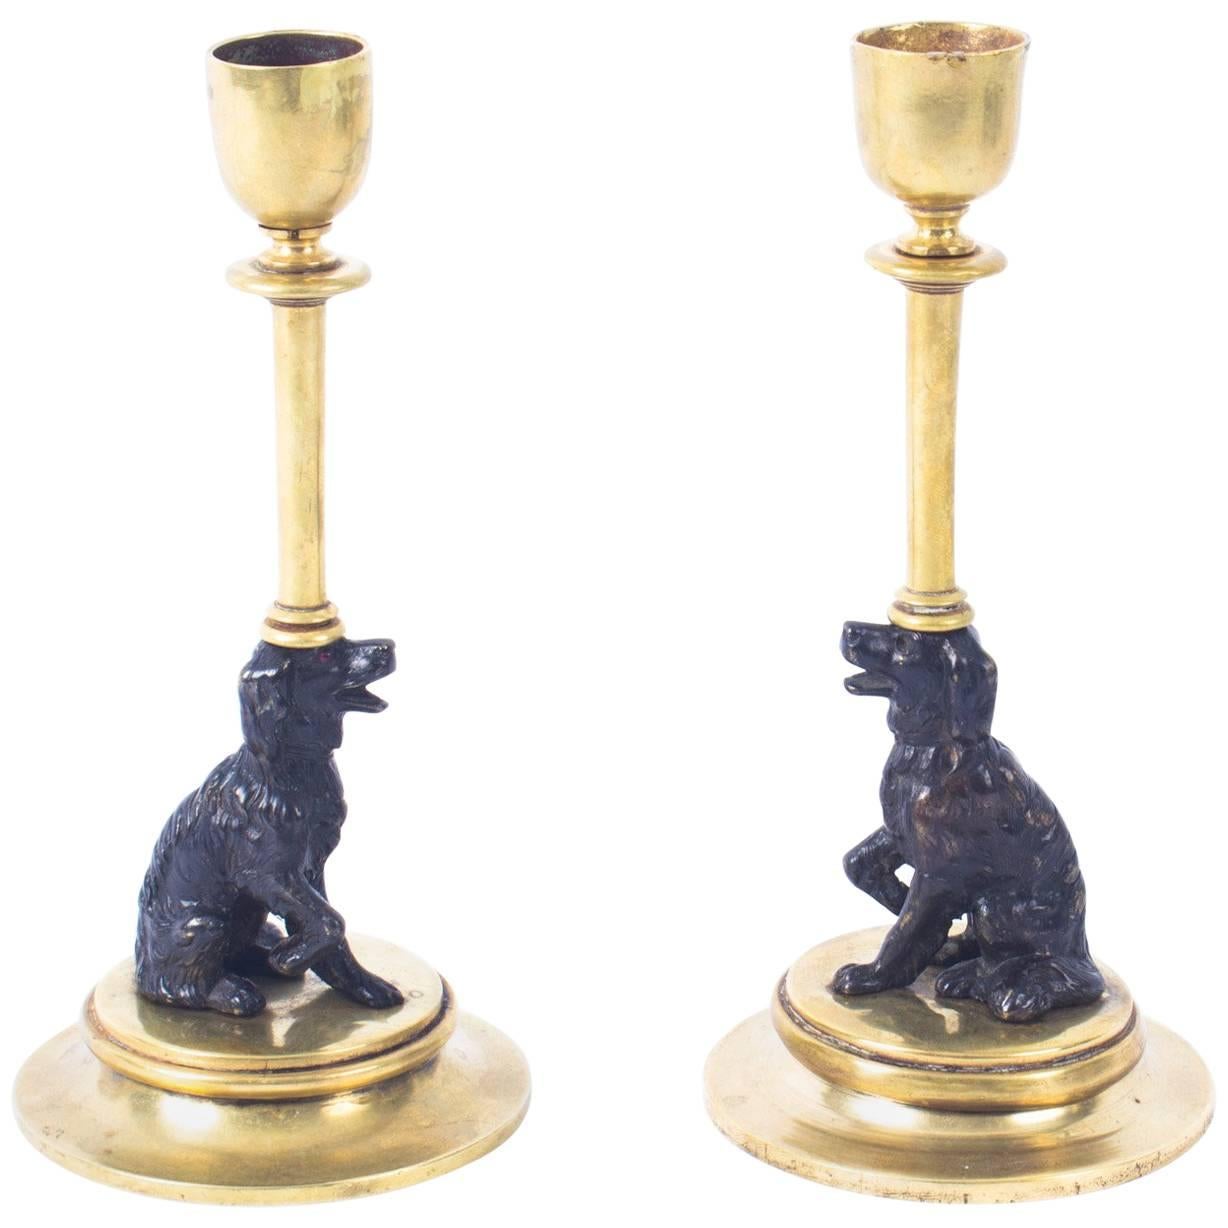 Antique Pair of French Novelty Bronze Spaniel Candlesticks, 19th Century